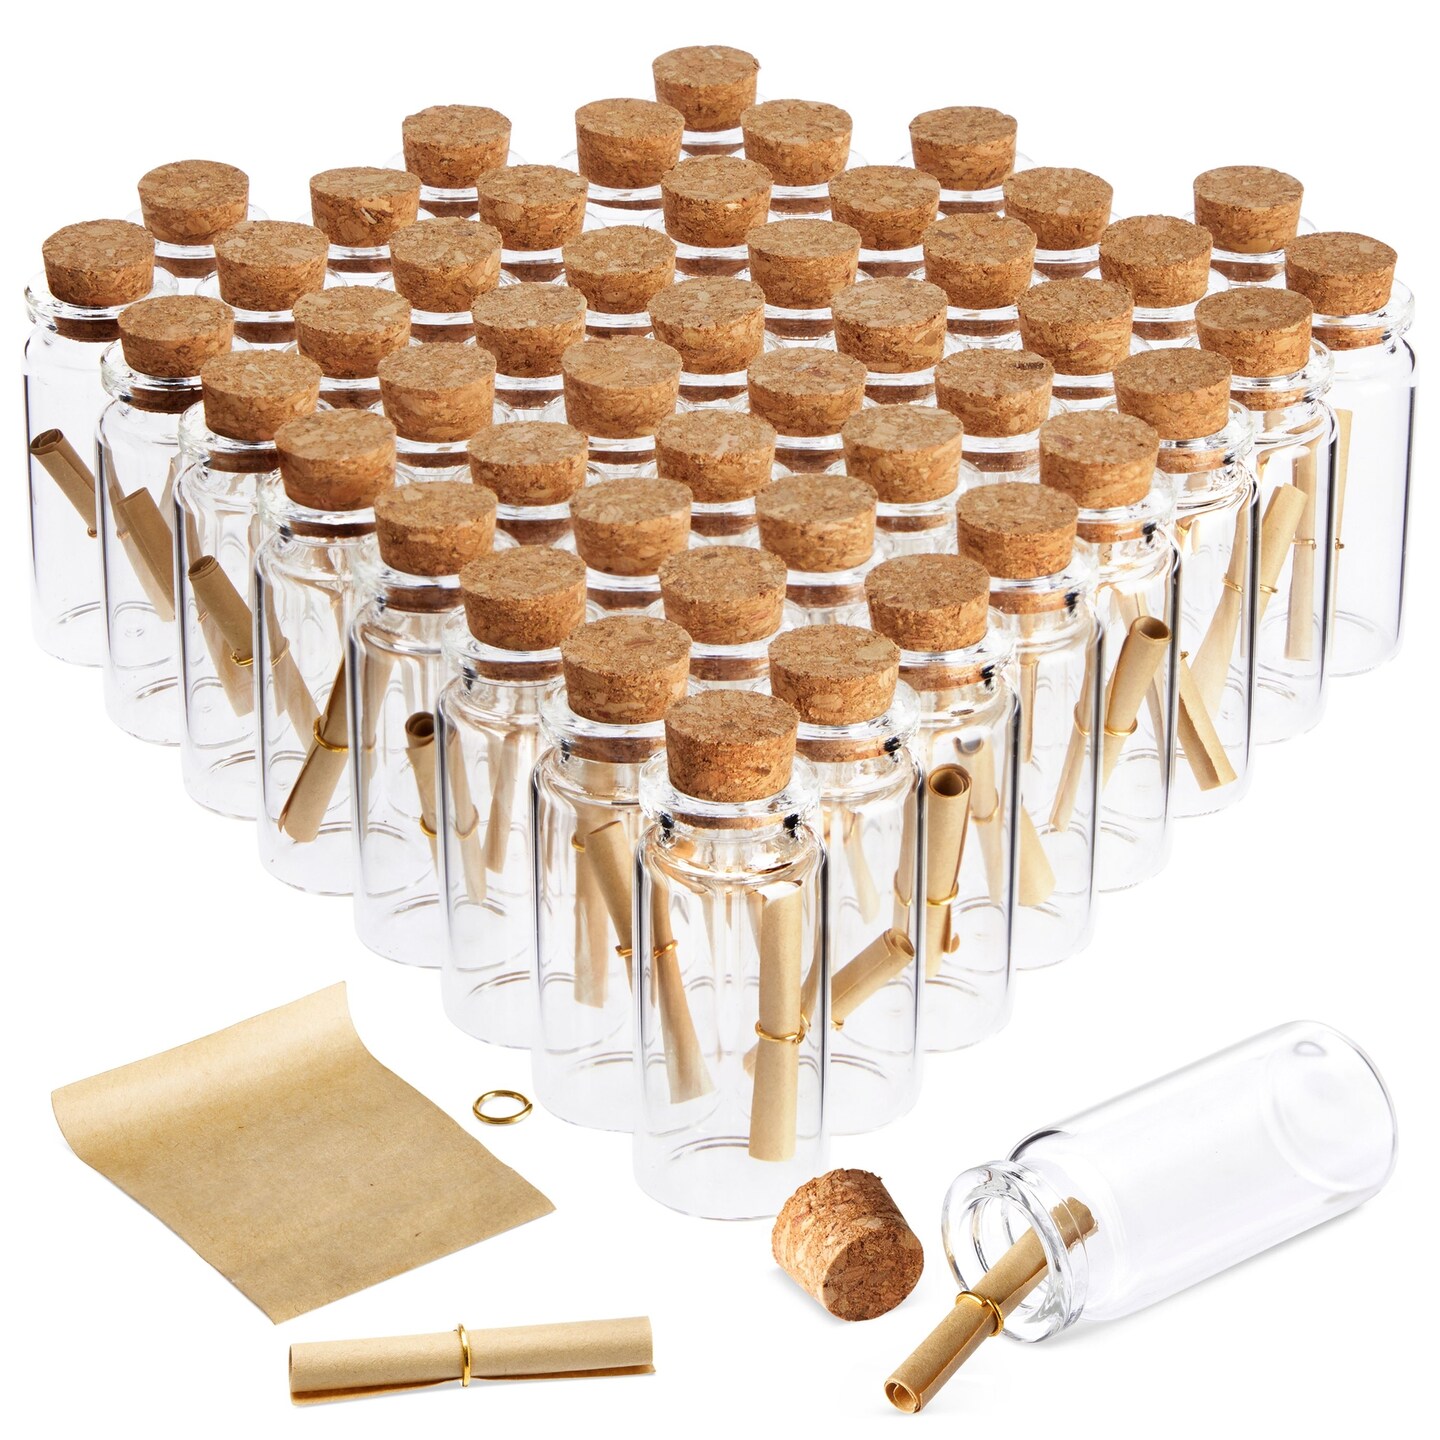 12 Pack Small Glass Jars with Cork Lids, 50ml Mini Bottles for DIY